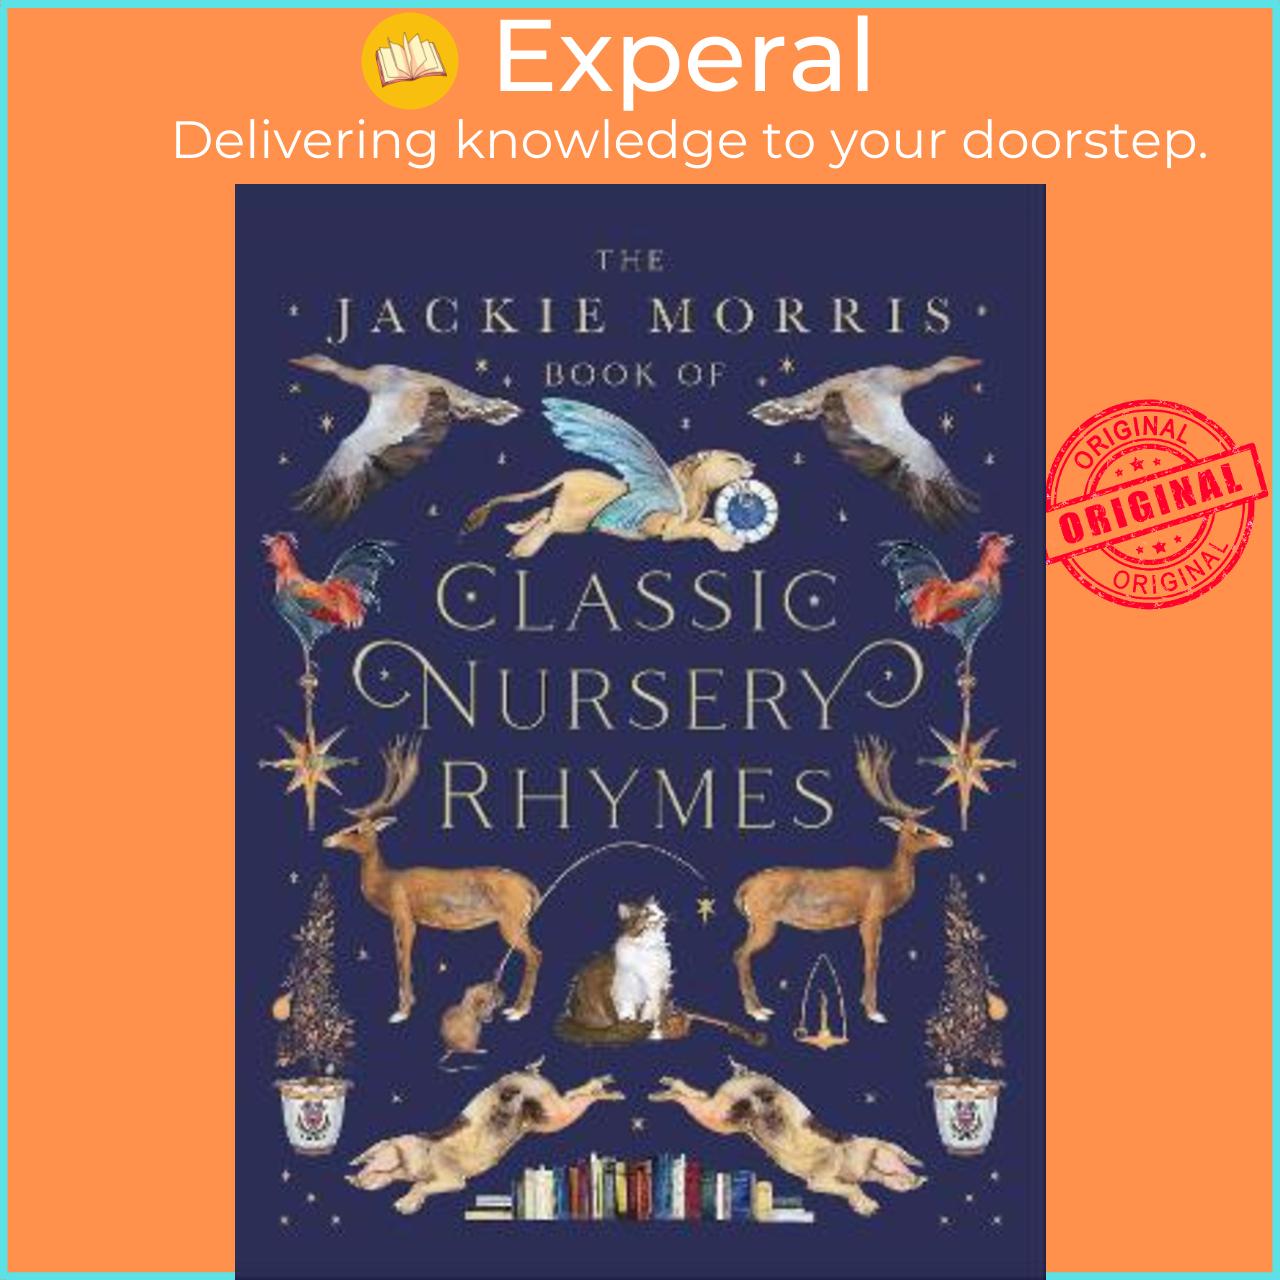 Sách - The Jackie Morris Book of Classic Nursery Rhymes by Jackie Morris (UK edition, hardcover)